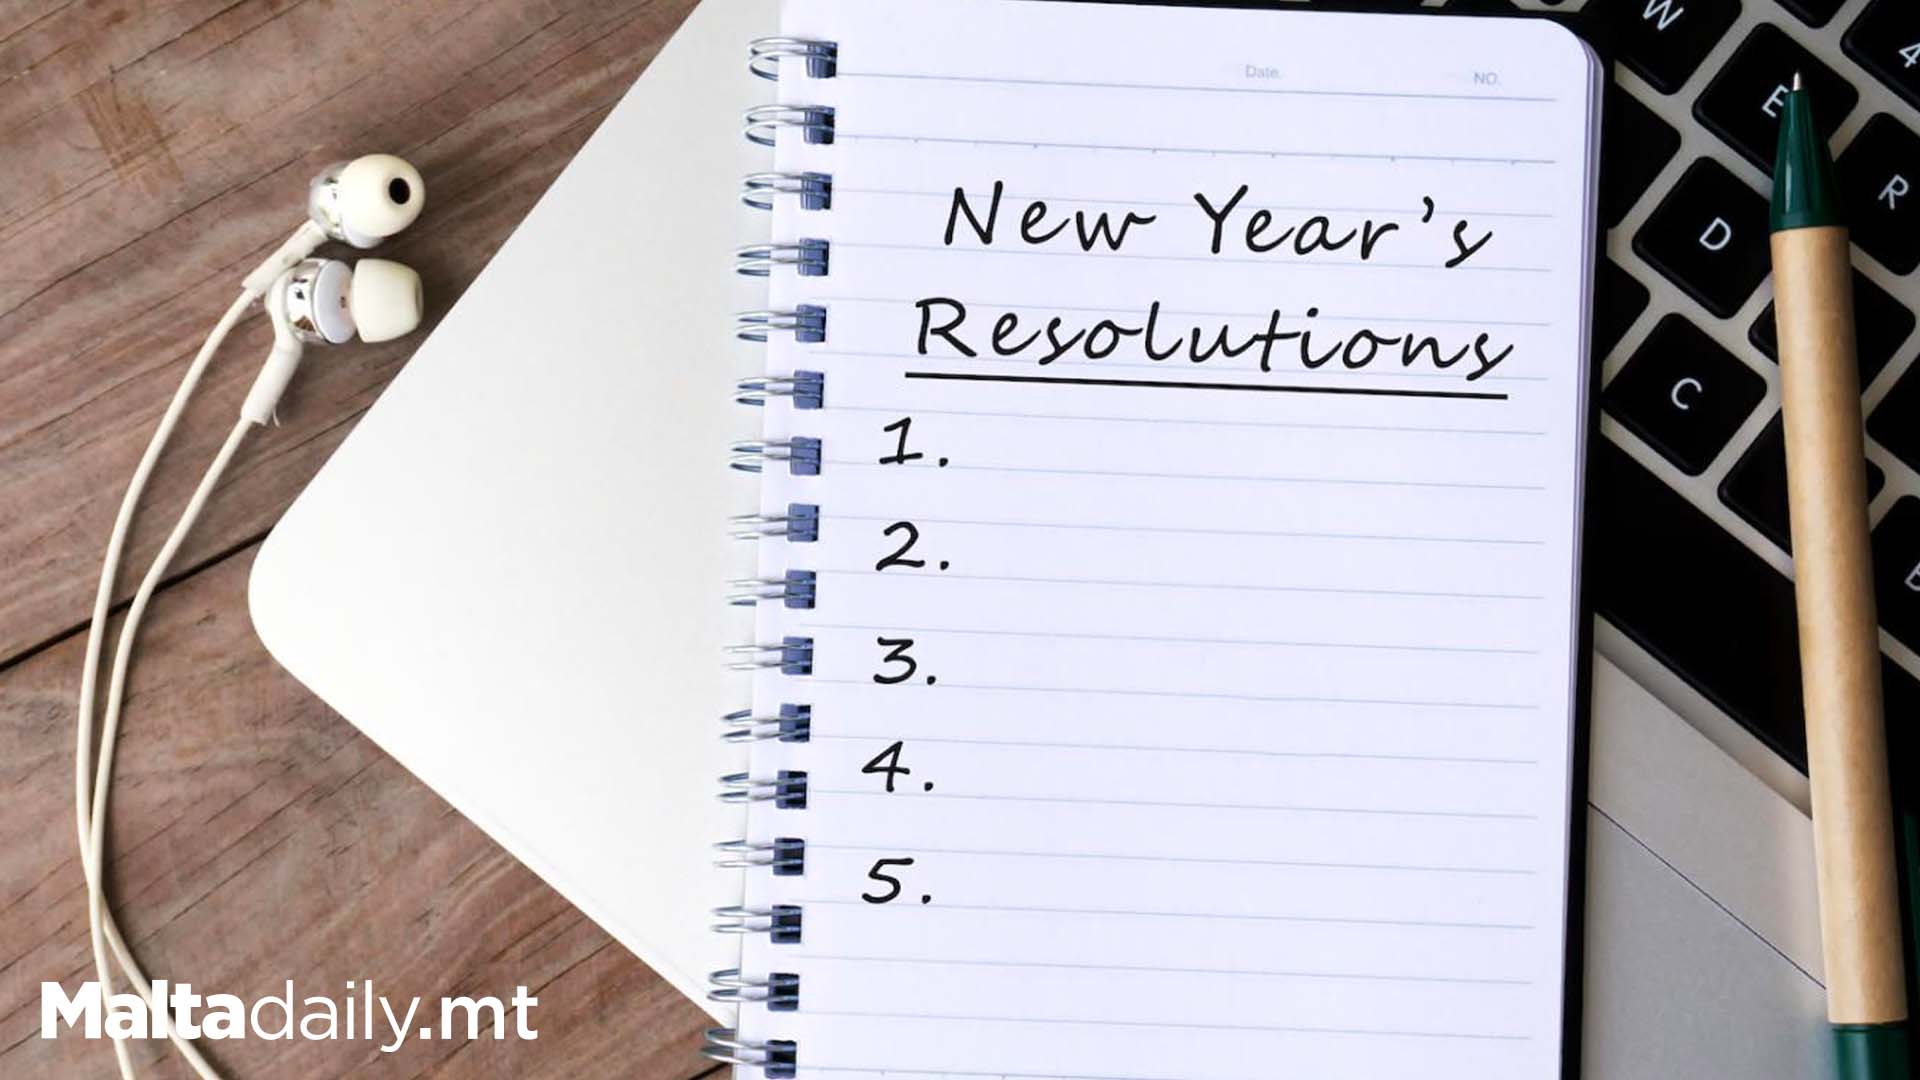 Here Are Some Of Your New Year's Resolutions